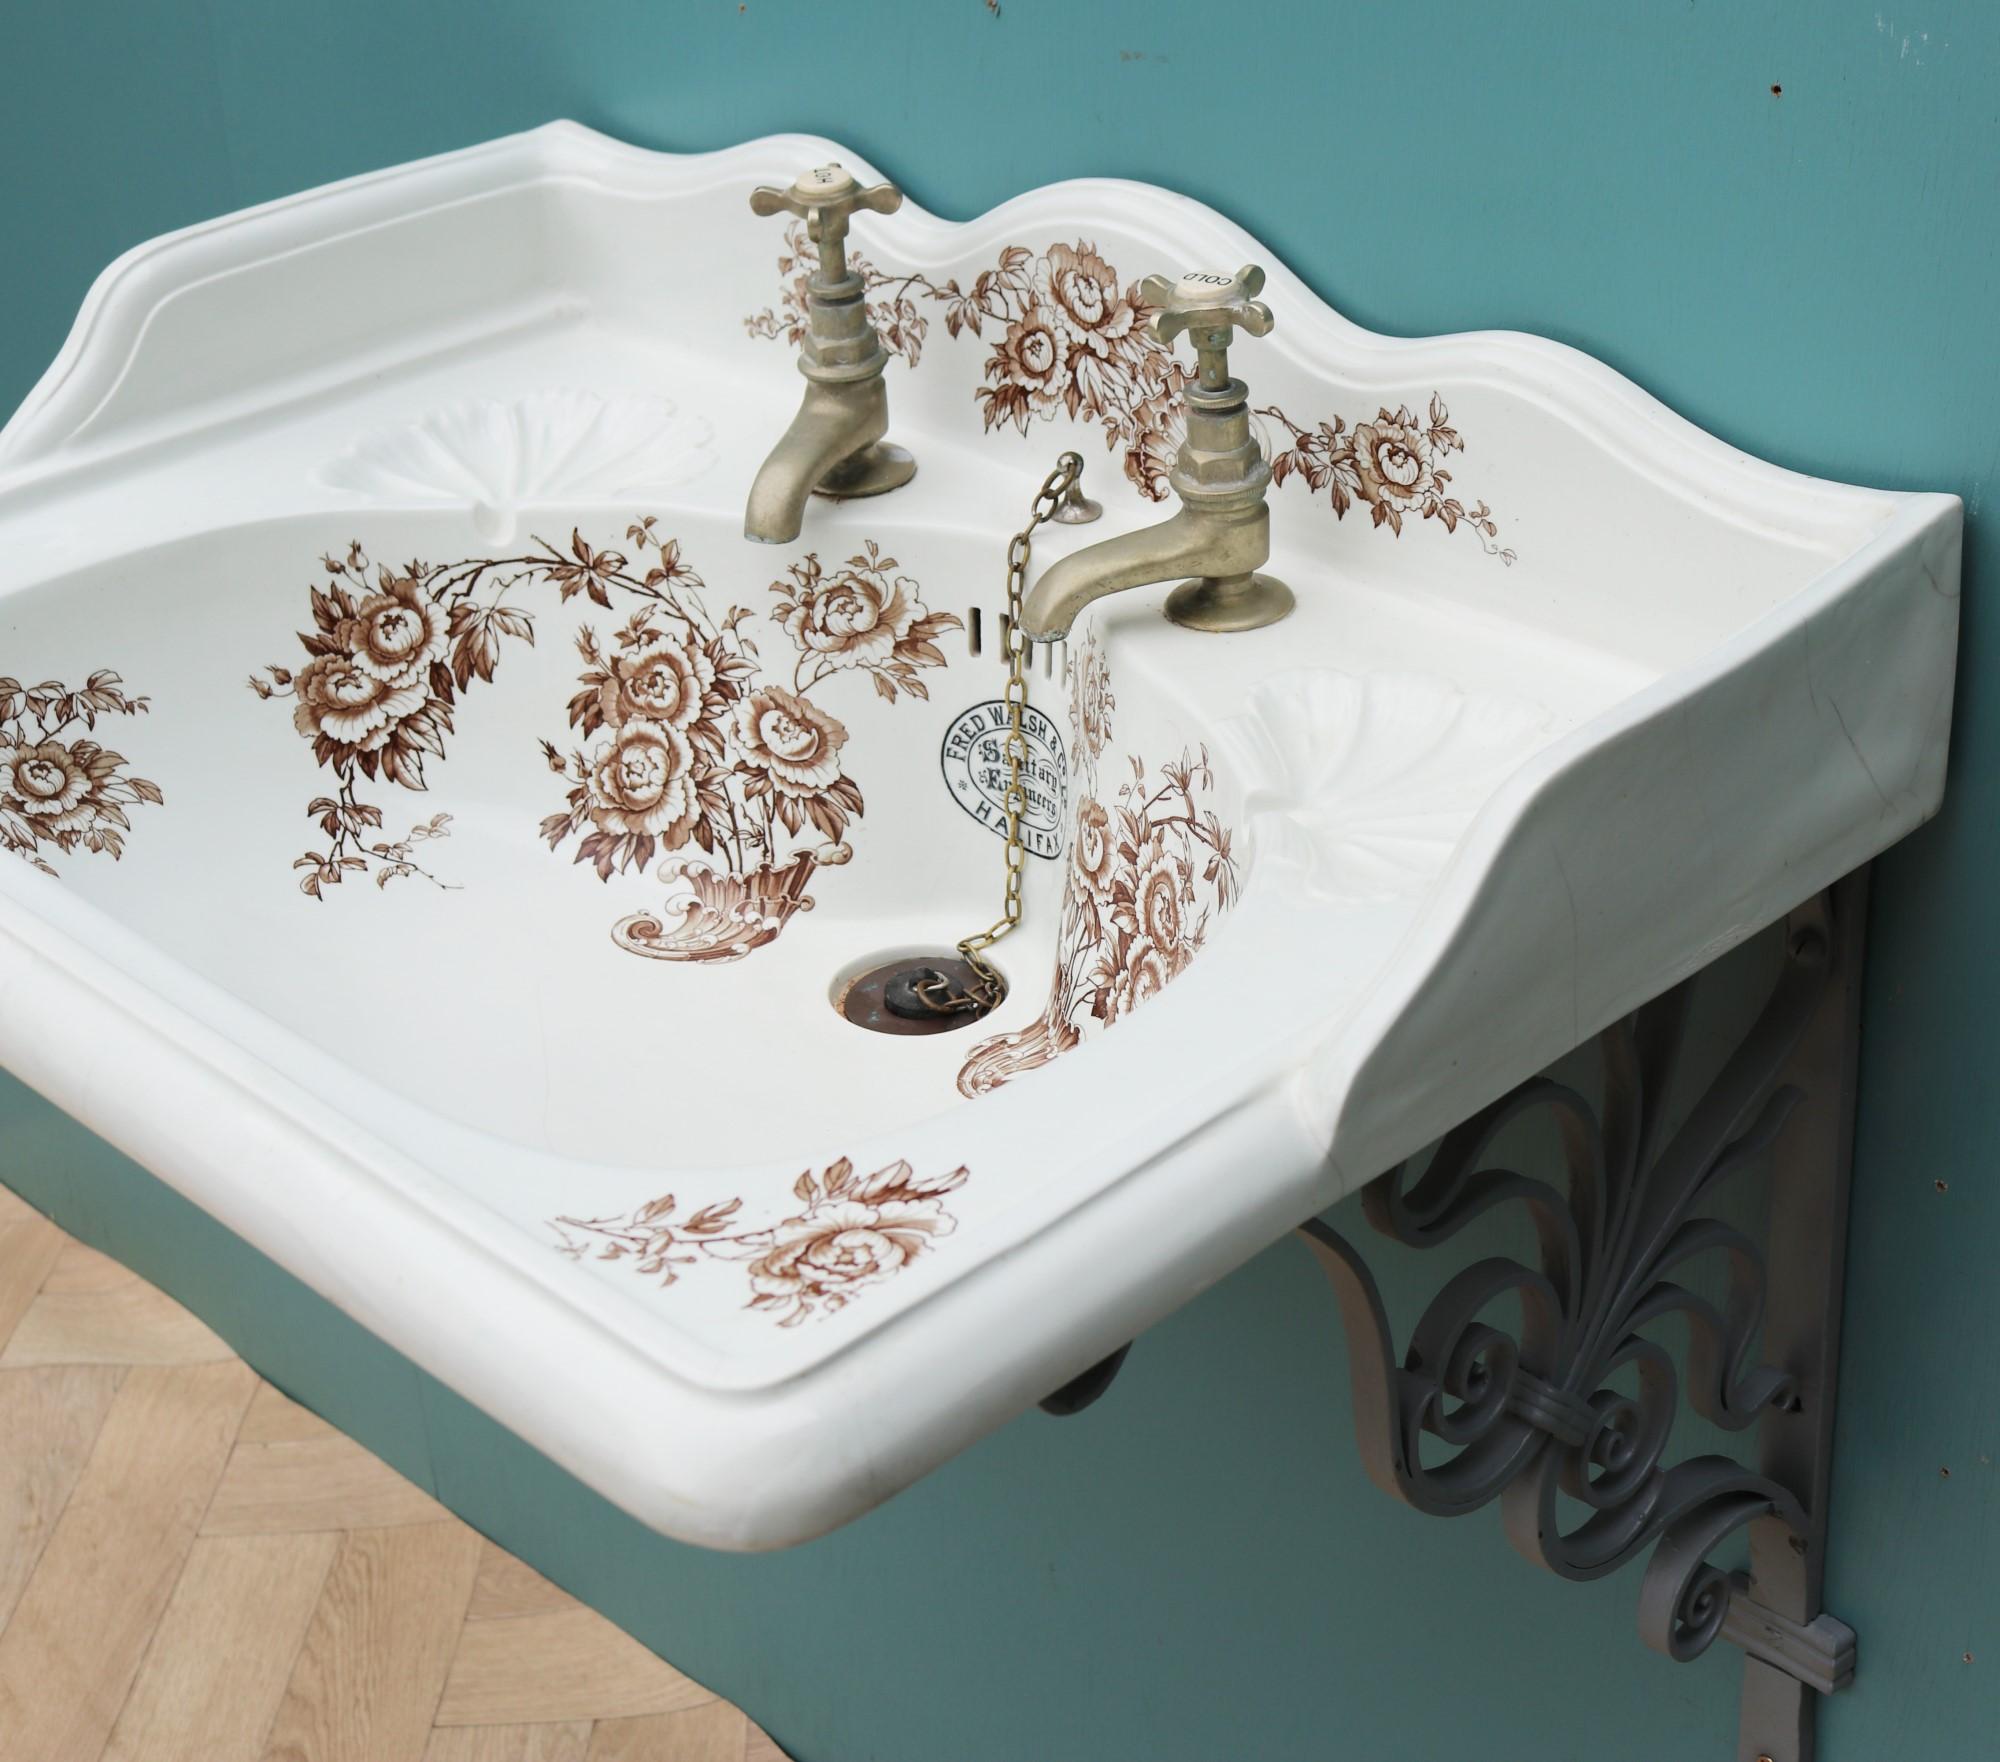 An antique transfer printed basin depicting floral scenes manufactured by Fred Walsh and Co. Supplied with wrought iron wall mounted brackets. Original nickel plated taps.